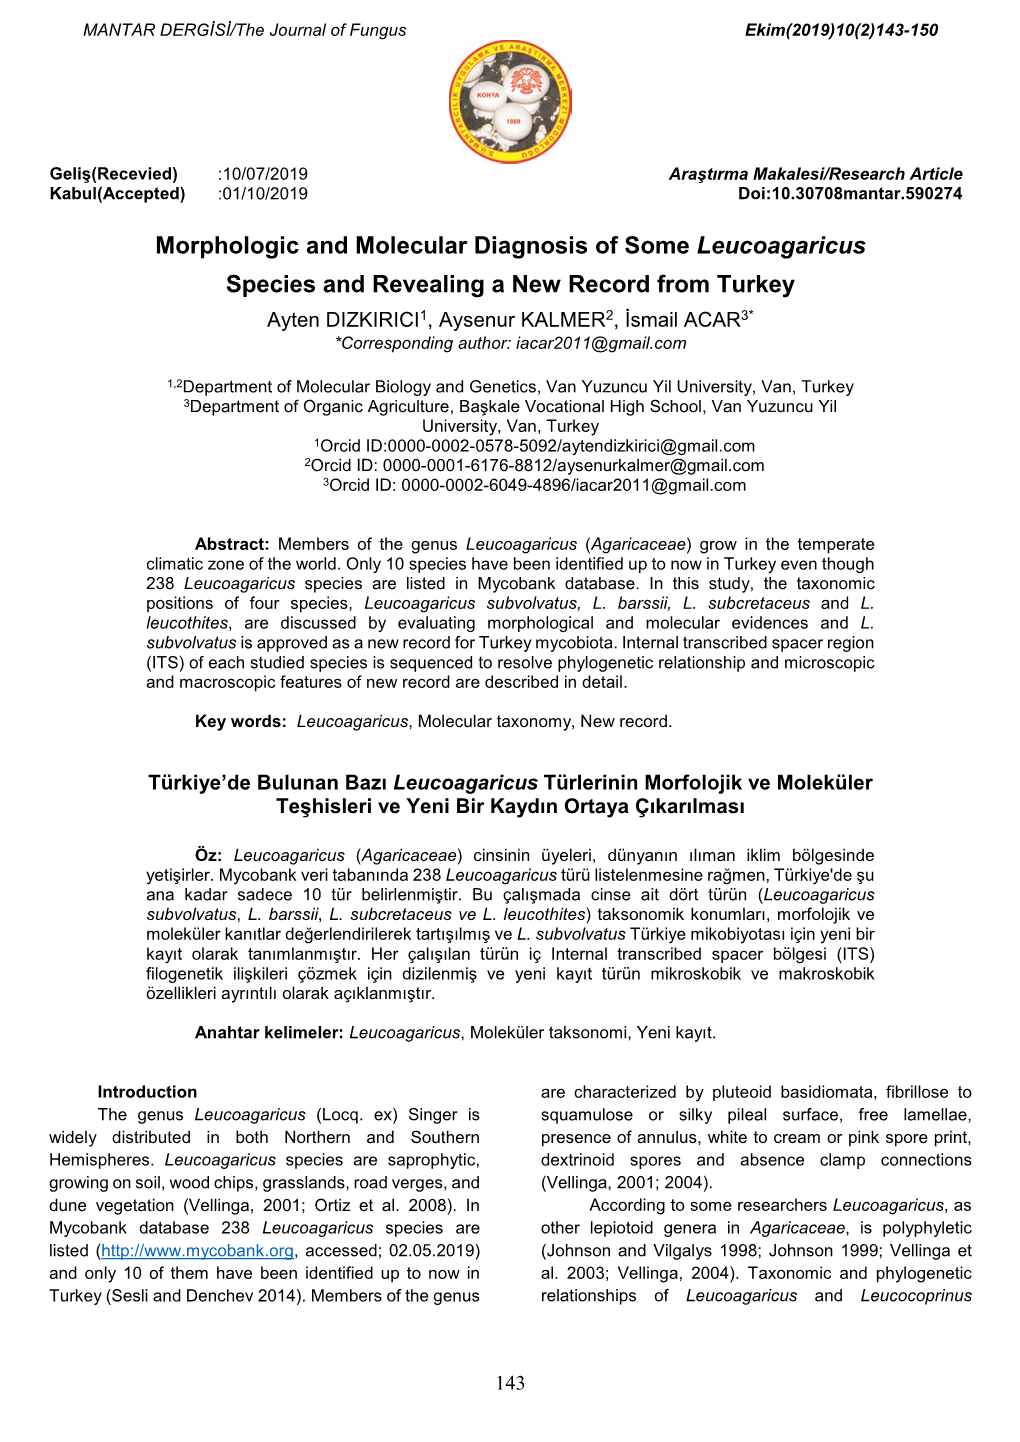 Morphologic and Molecular Diagnosis of Some Leucoagaricus Species and Revealing a New Record from Turkey